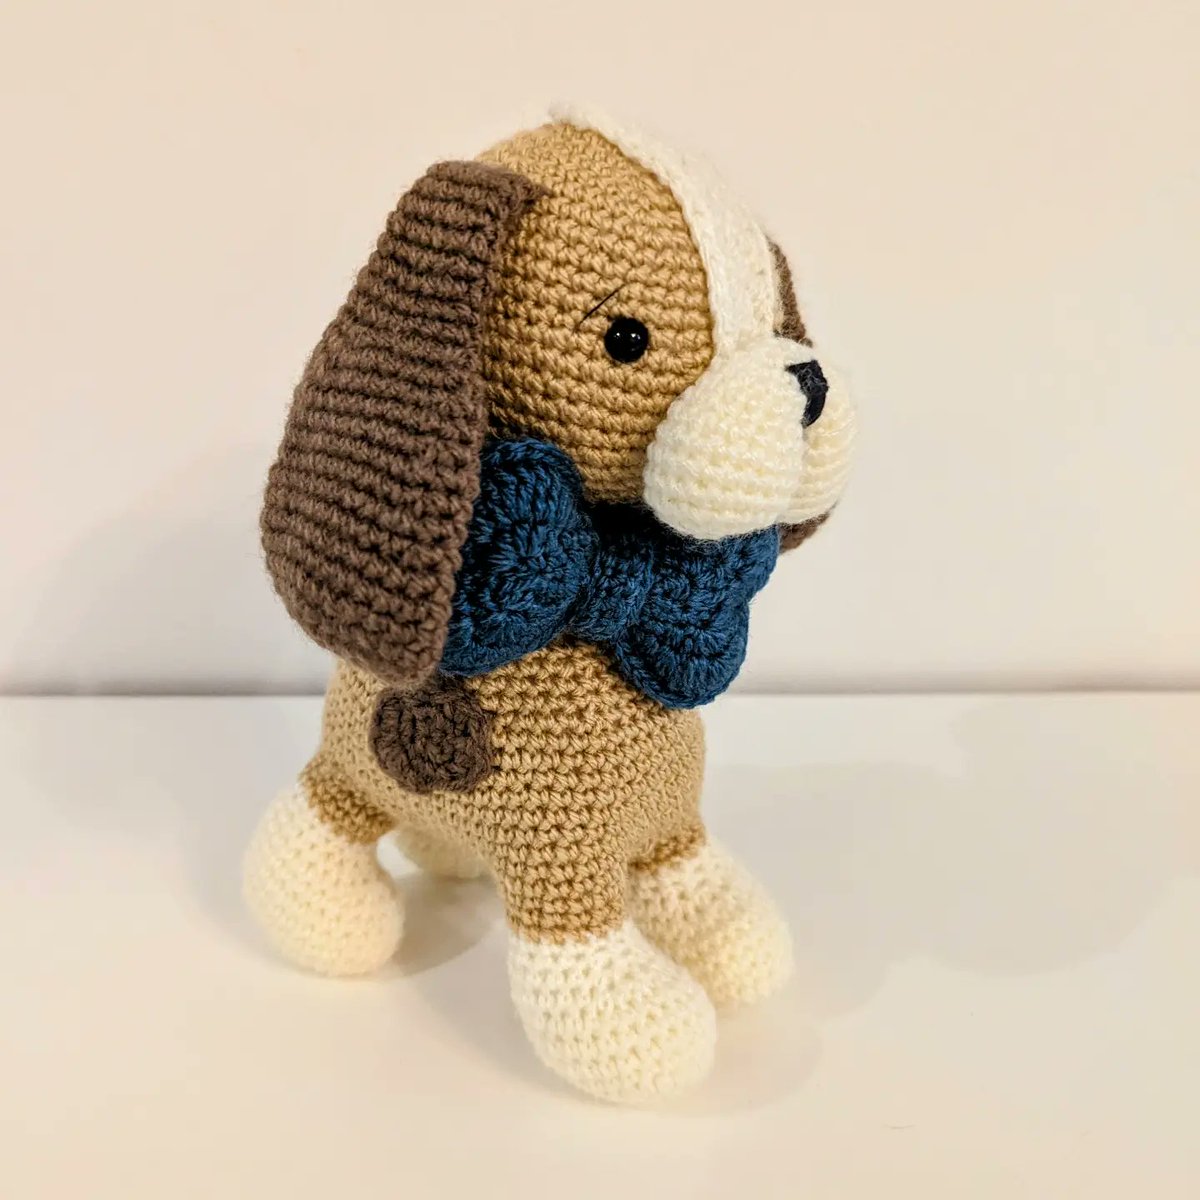 Dougie the Beagle! Another WIP finished 🤗

Pattern: @LittleAquaGirl
Yarn: @paintboxyarns 

#crochet #crafting #yarn #yarnaddict #completedproject #beagle #animals